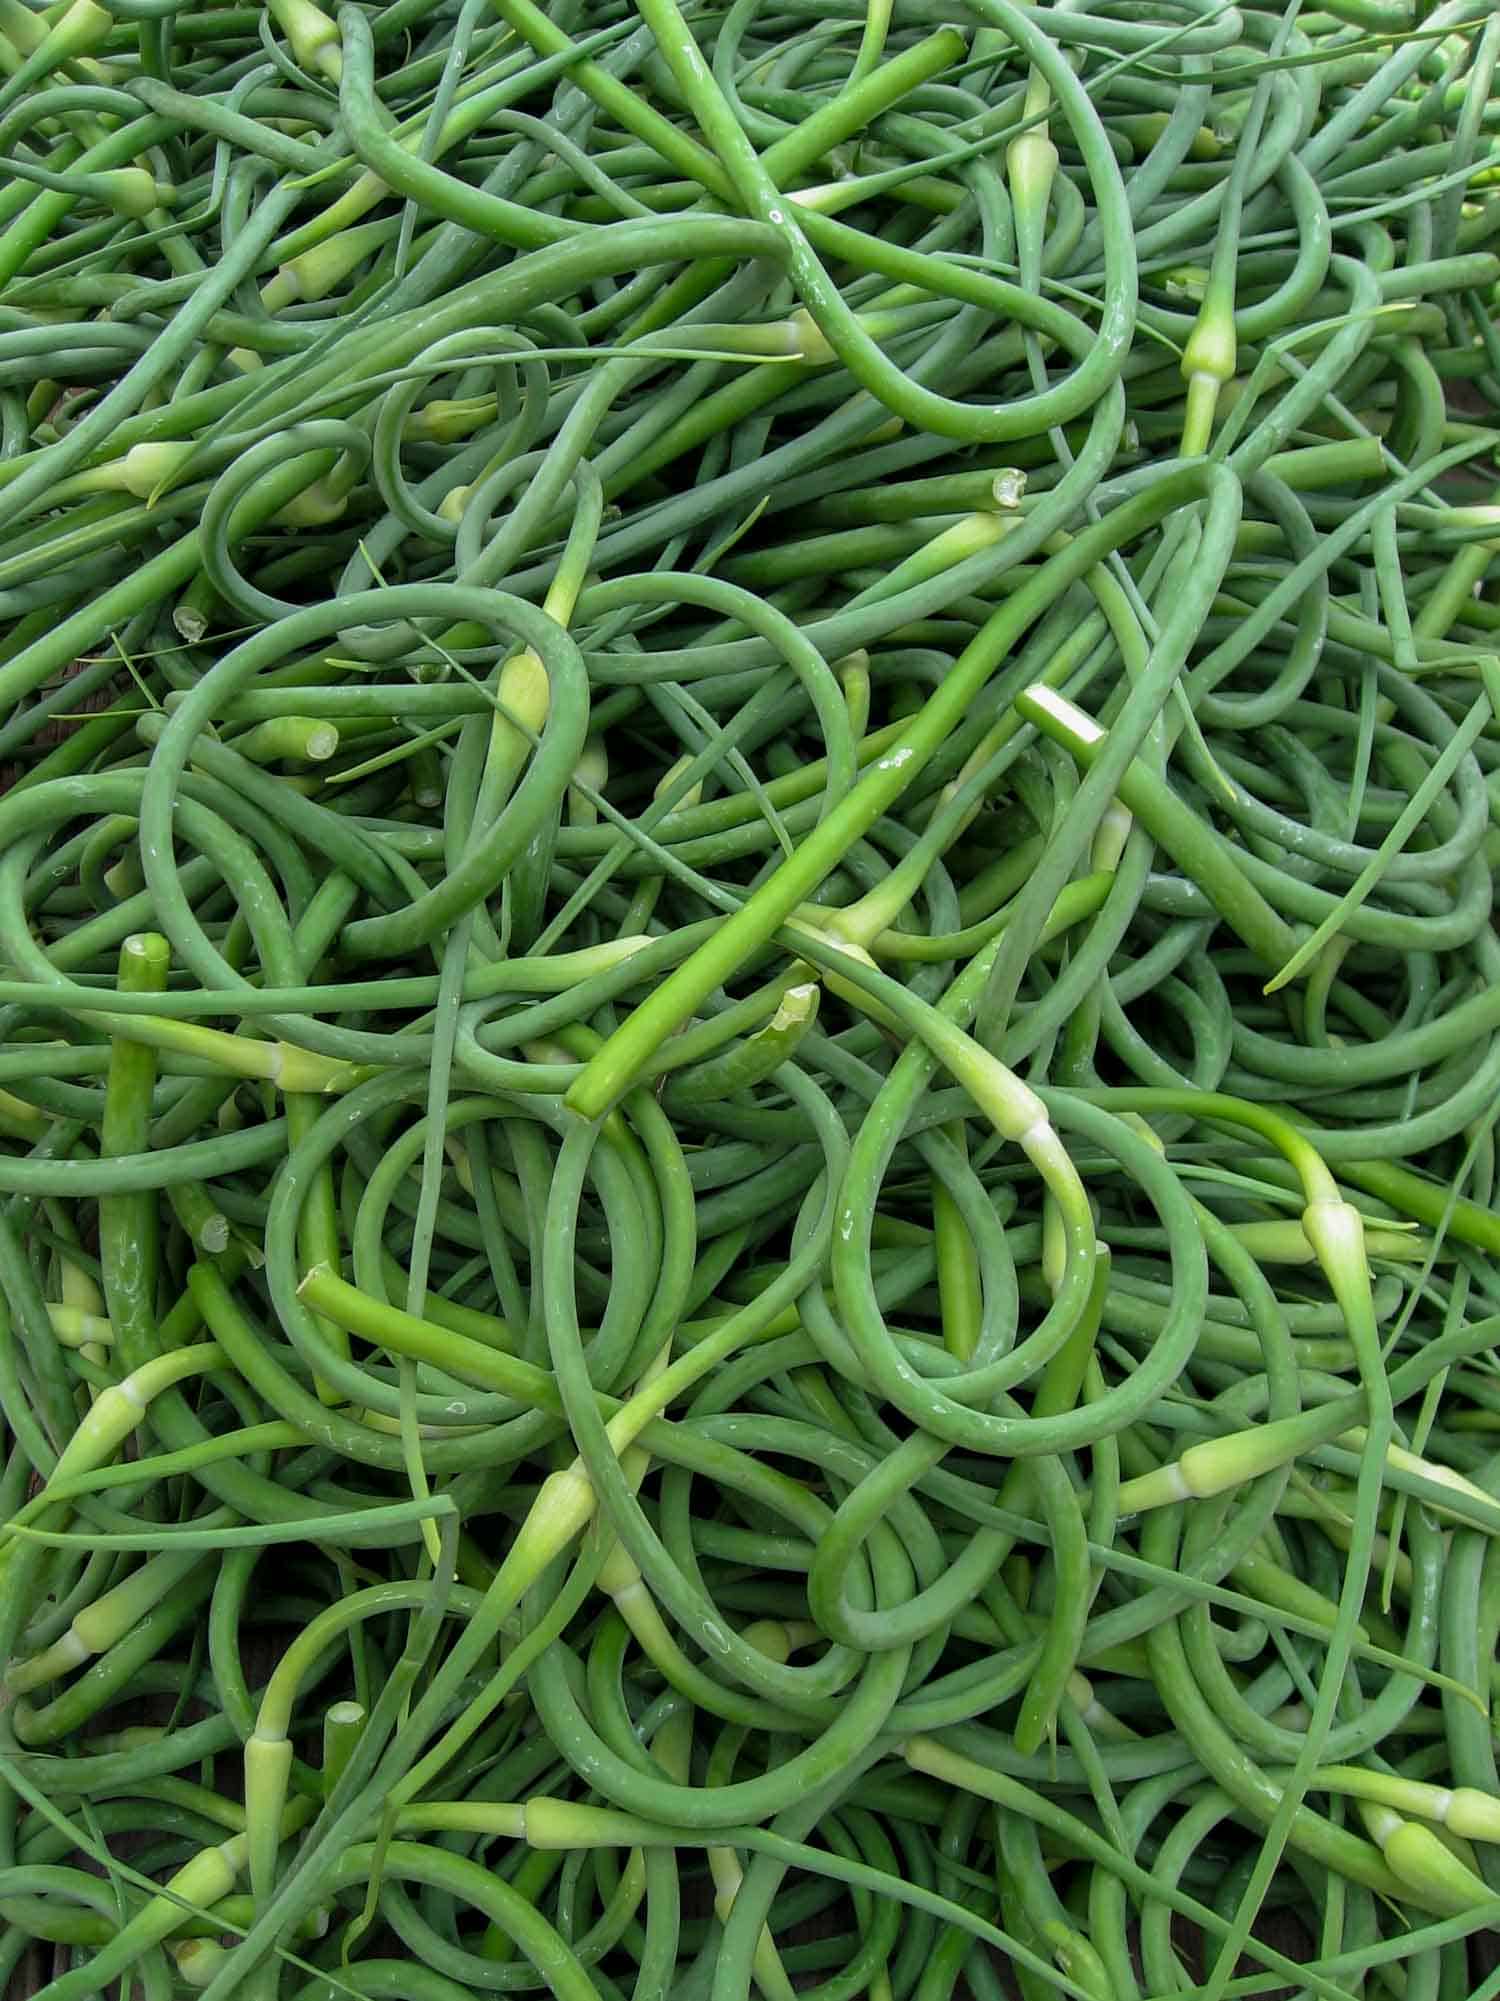 piles of garlic scapes harvested